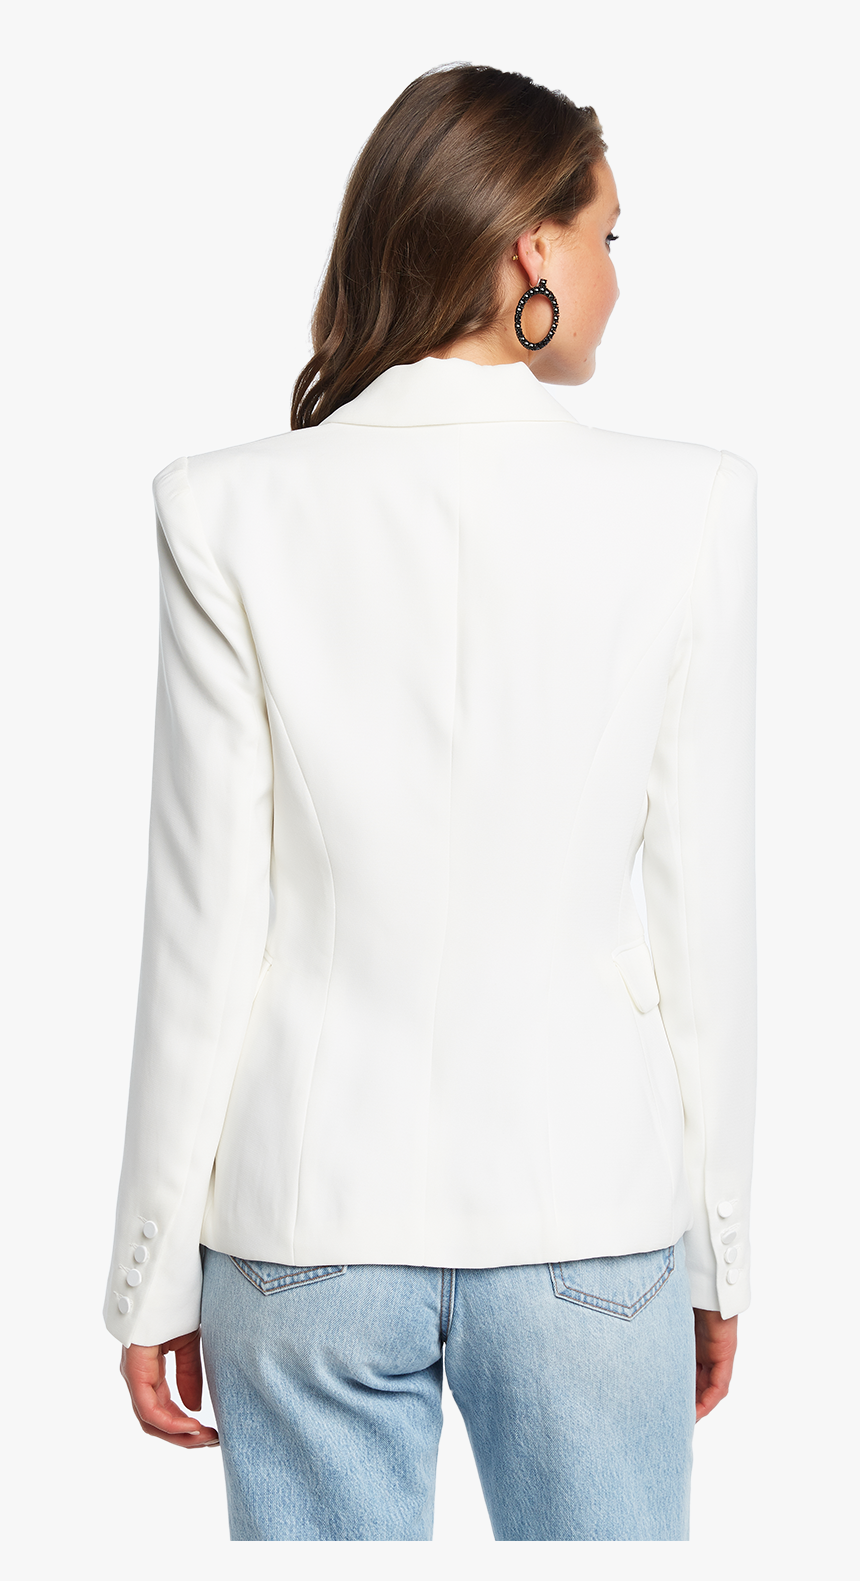 Tuxedo Jacket In Colour Bright White - Formal Wear, HD Png Download, Free Download